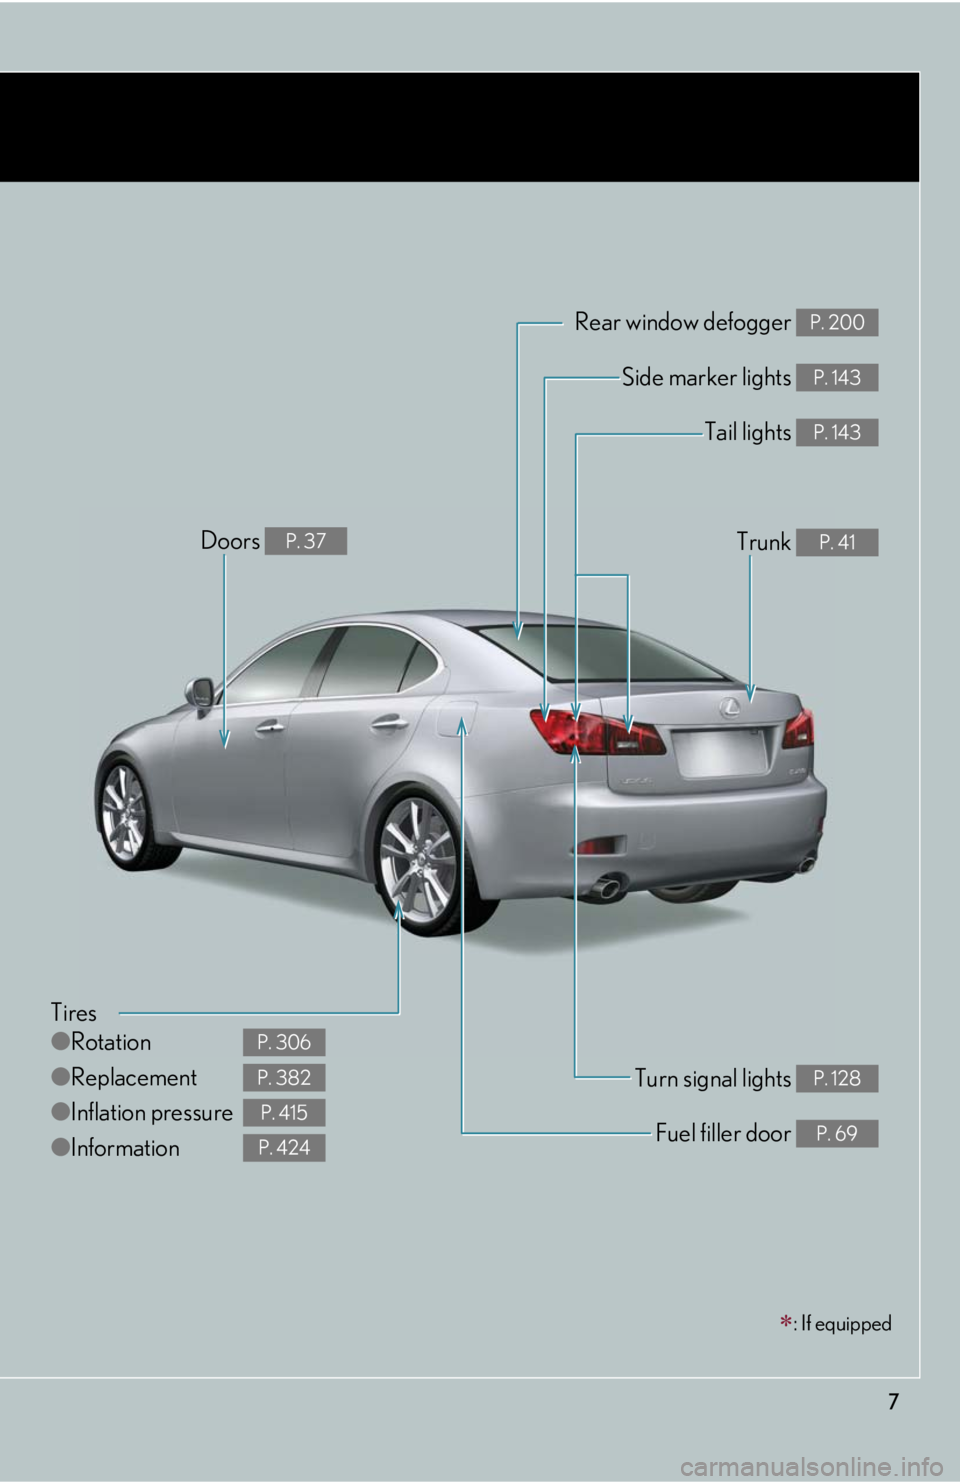 Lexus IS250 2008  Alphabetical index / LEXUS 2008 IS250 OWNERS MANUAL (OM53699U) 7
: If equipped
Tires
●Rotation
● Replacement
● Inflation pressure
● Information
P. 306
P. 382
P. 415
P. 424
Tail lights P. 143
Side marker lights P. 143
Trunk P. 41
Rear window defogger P.